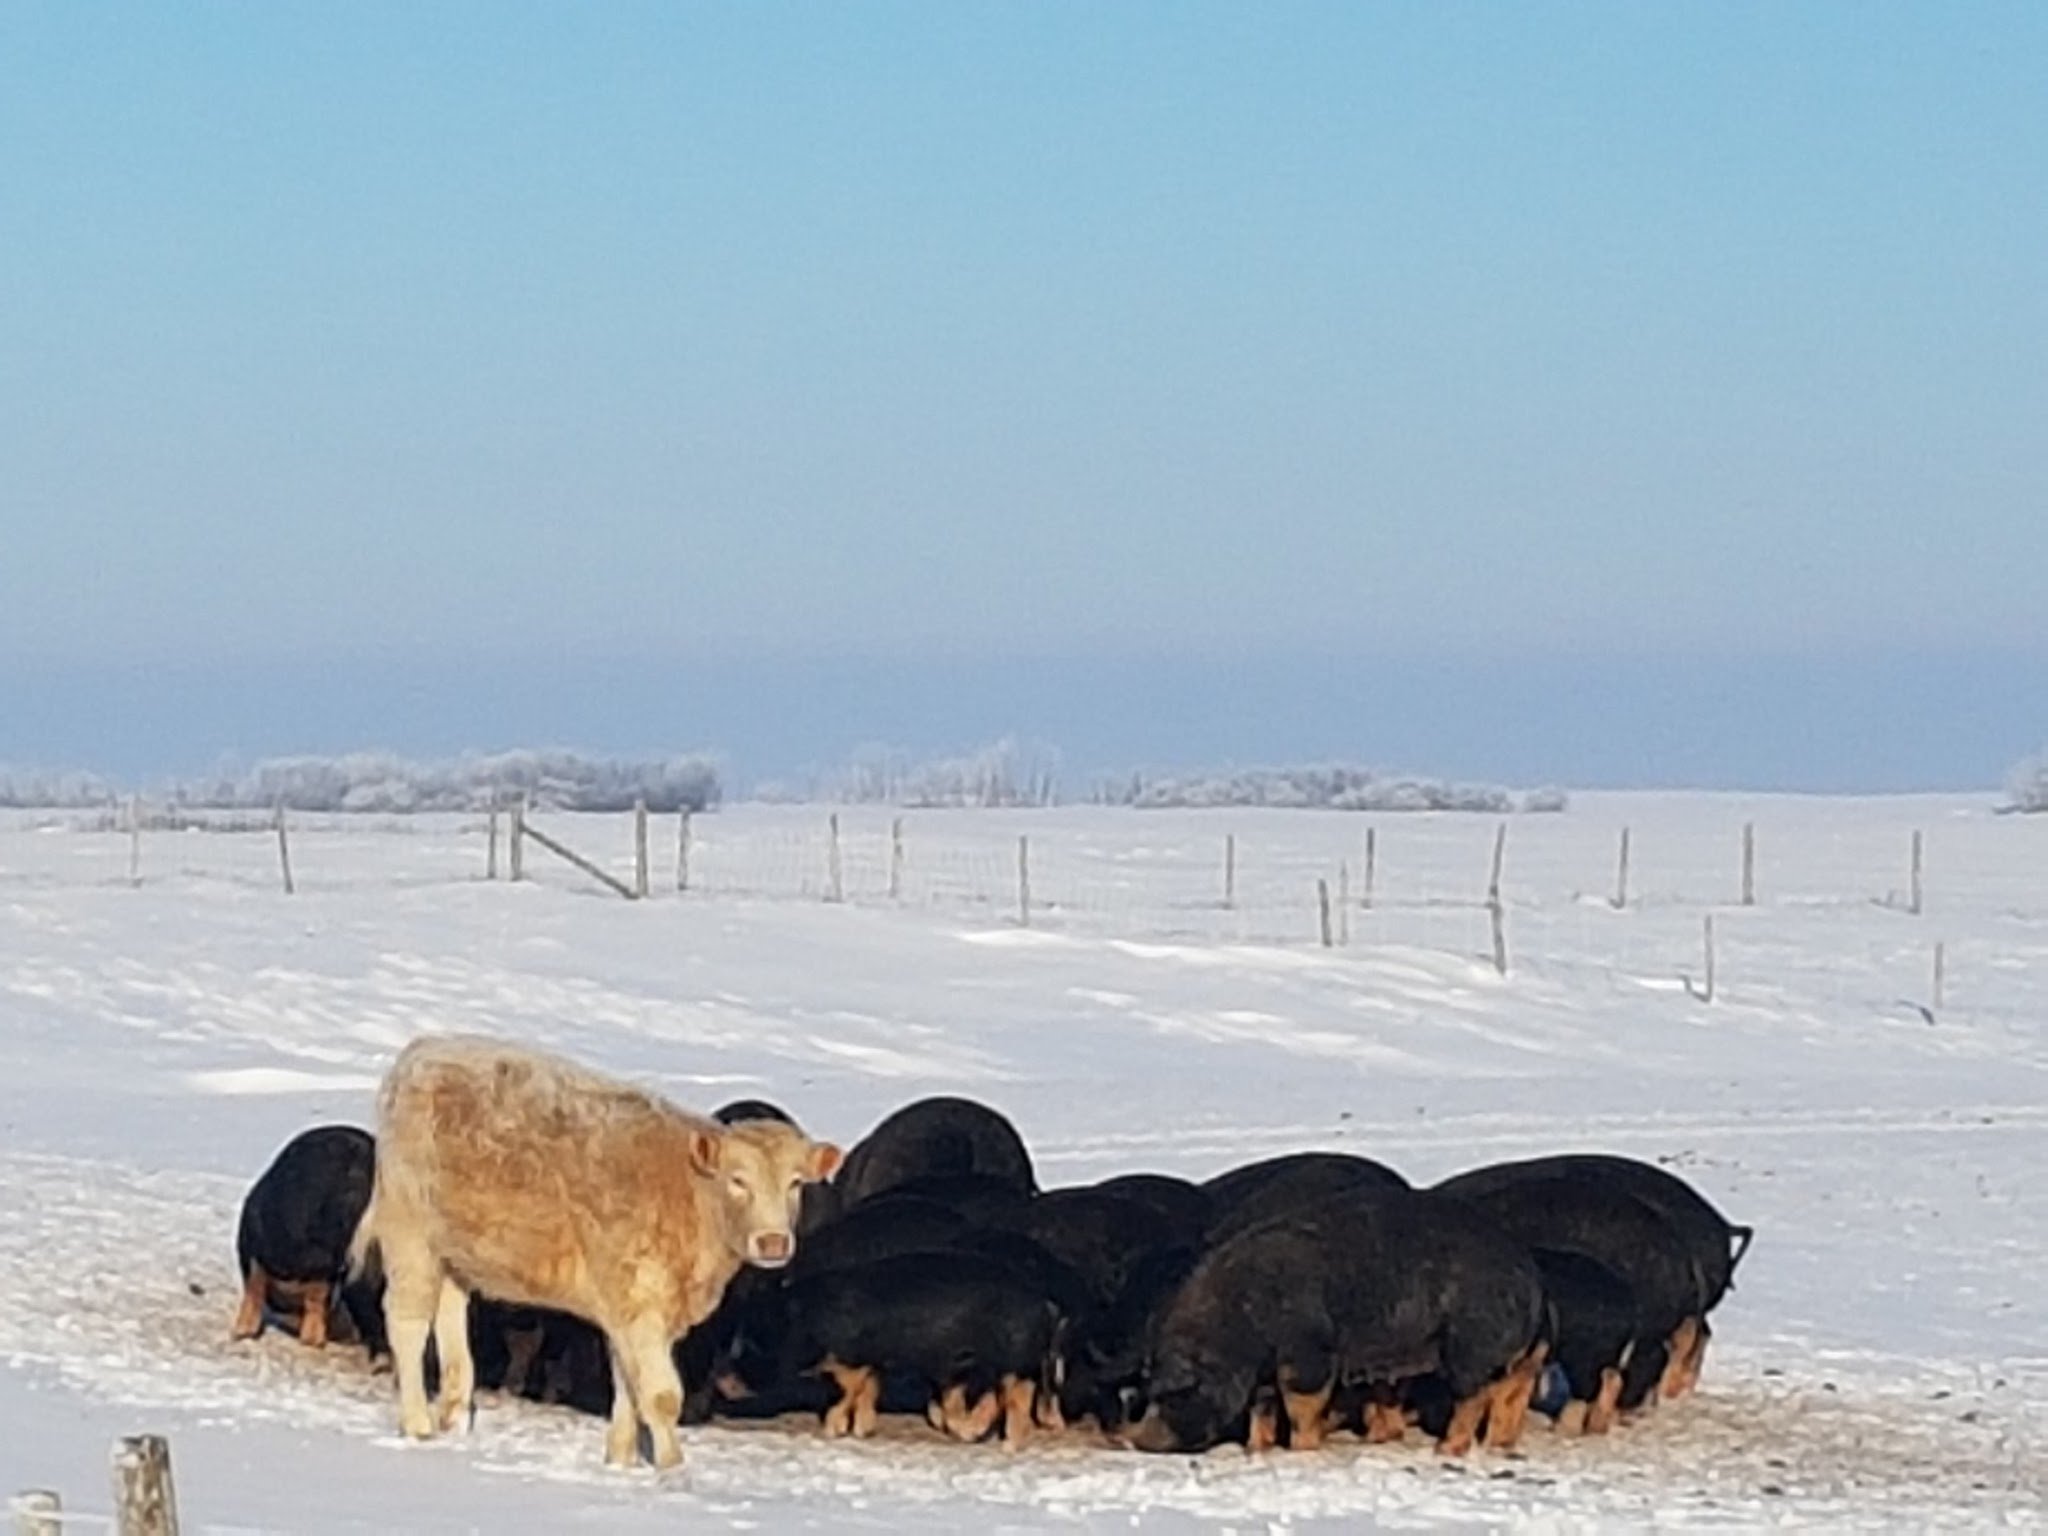 Berkshire pigs and cows in winter - multi species grazing